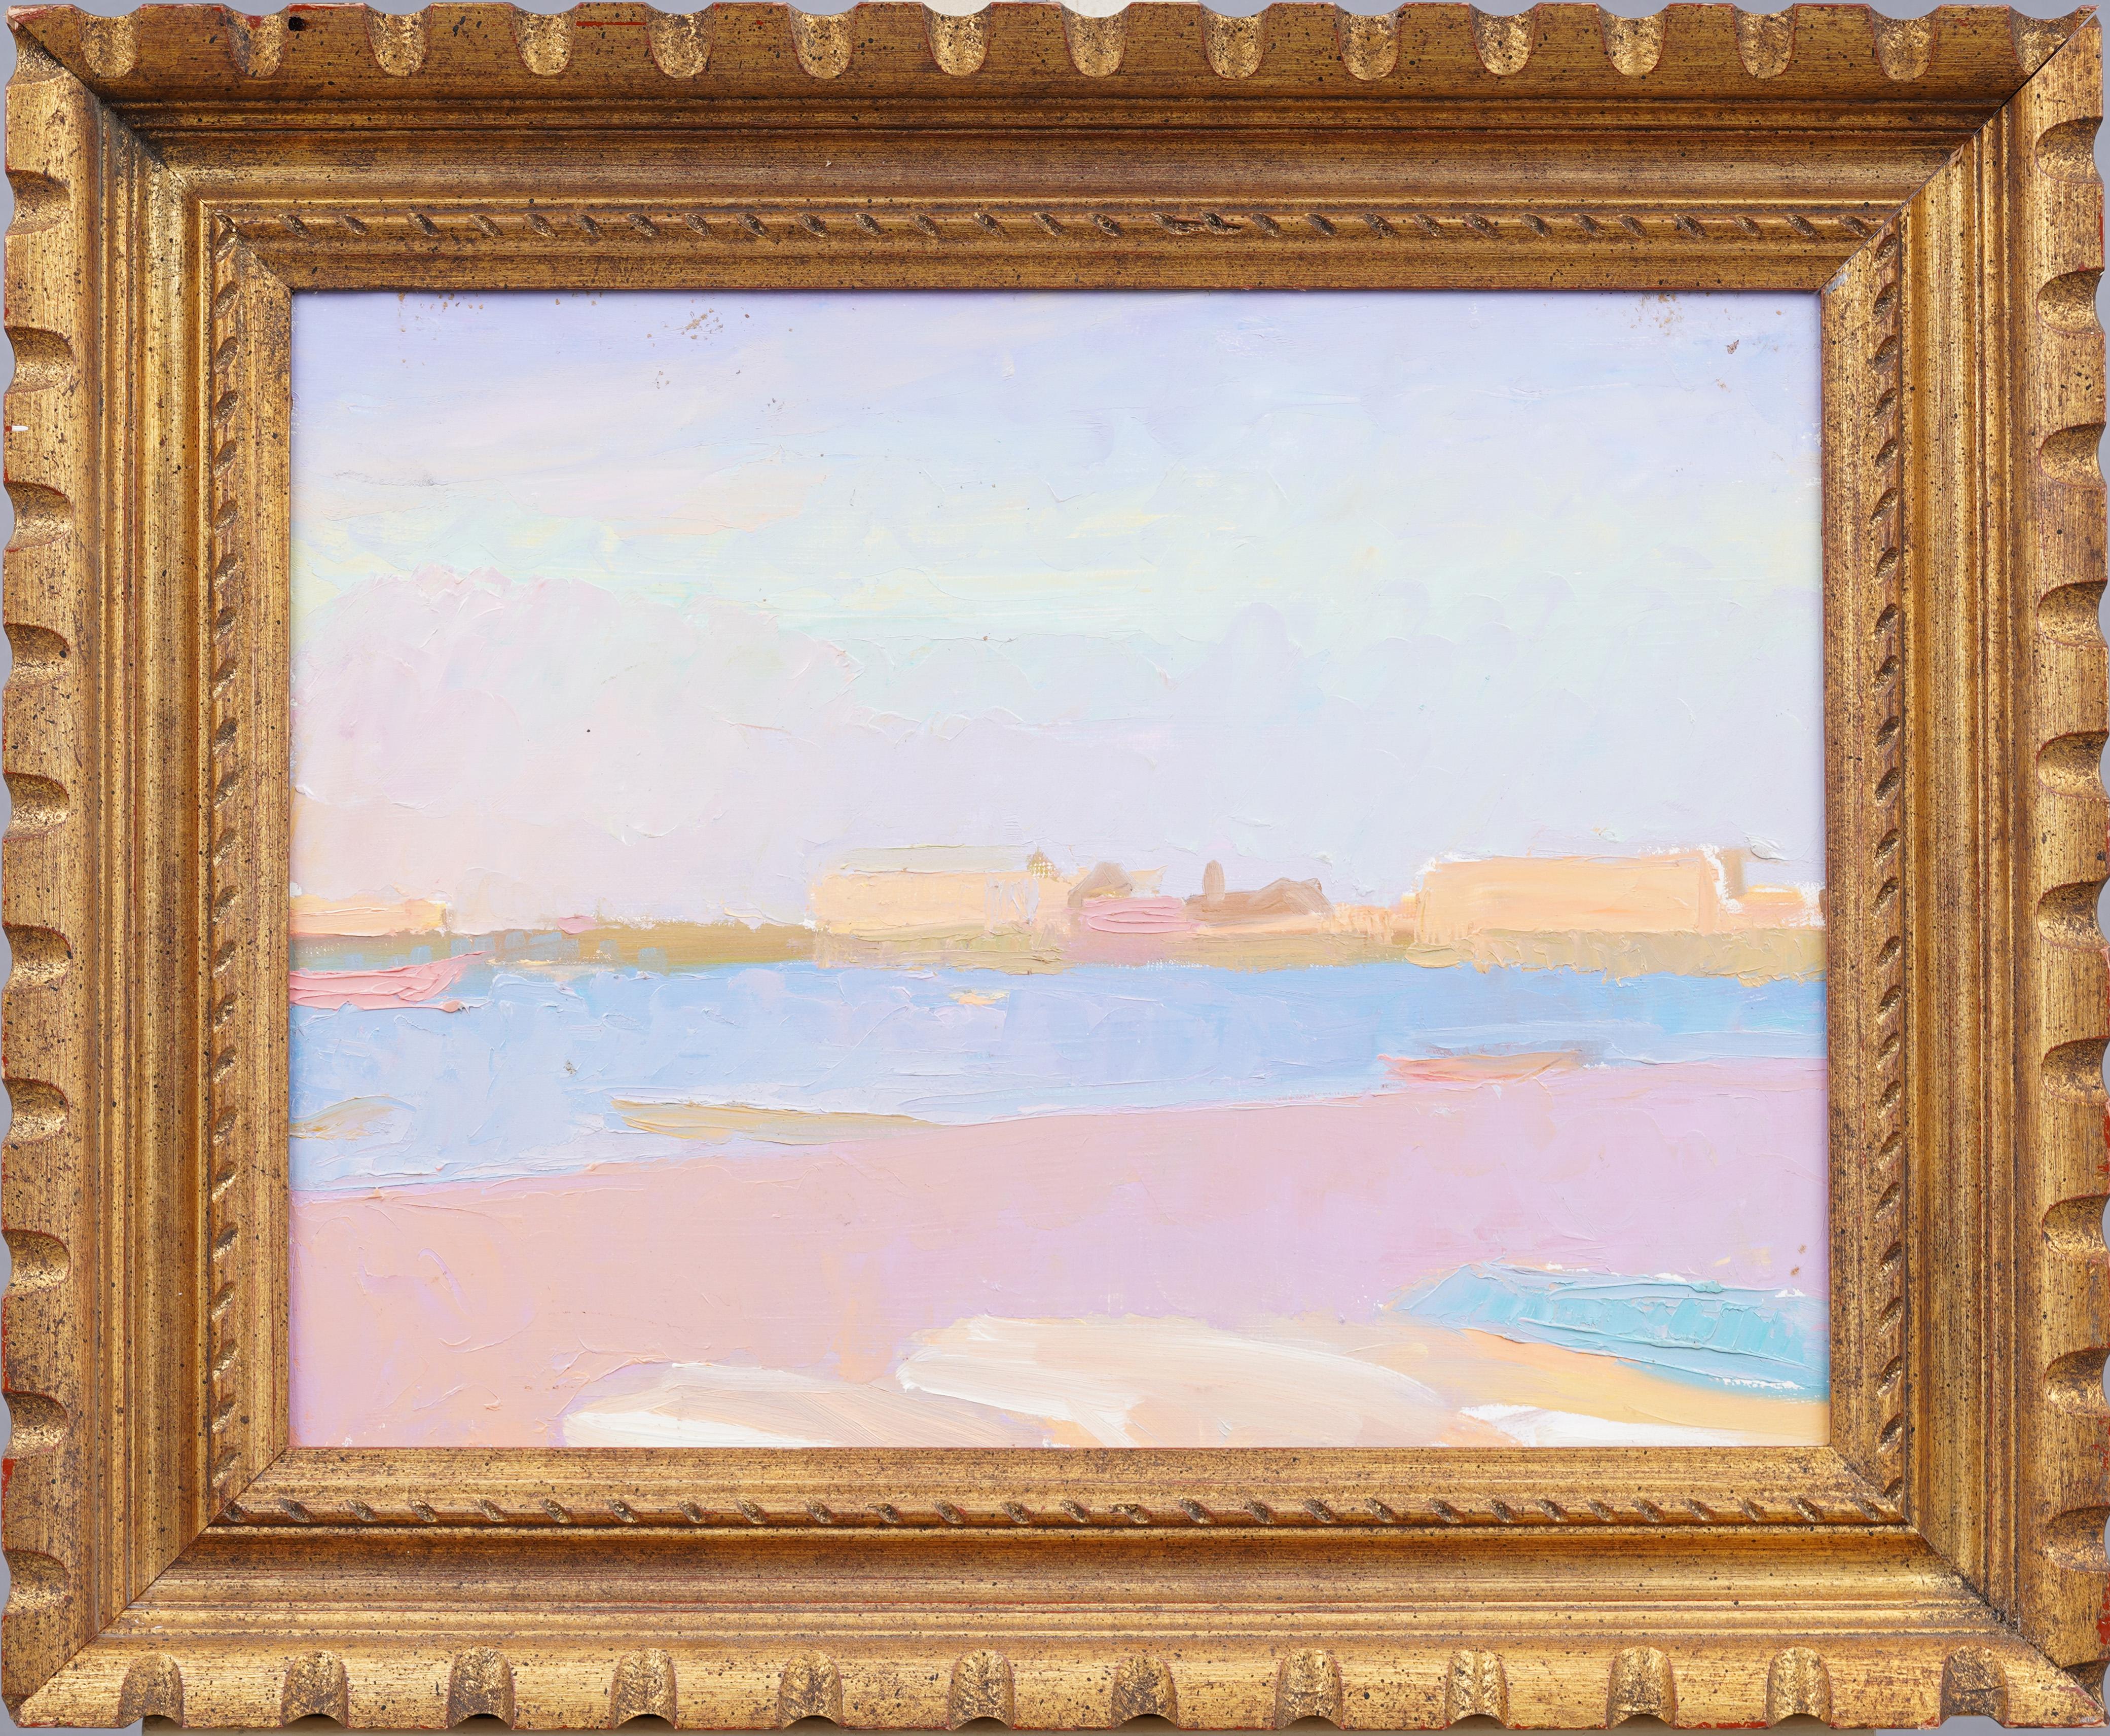 Very impressive mid 20th century beach scene.  Great colors.  Nice vintage frame.  Oil on board.  No signature found.  Image size, 12H x16L.